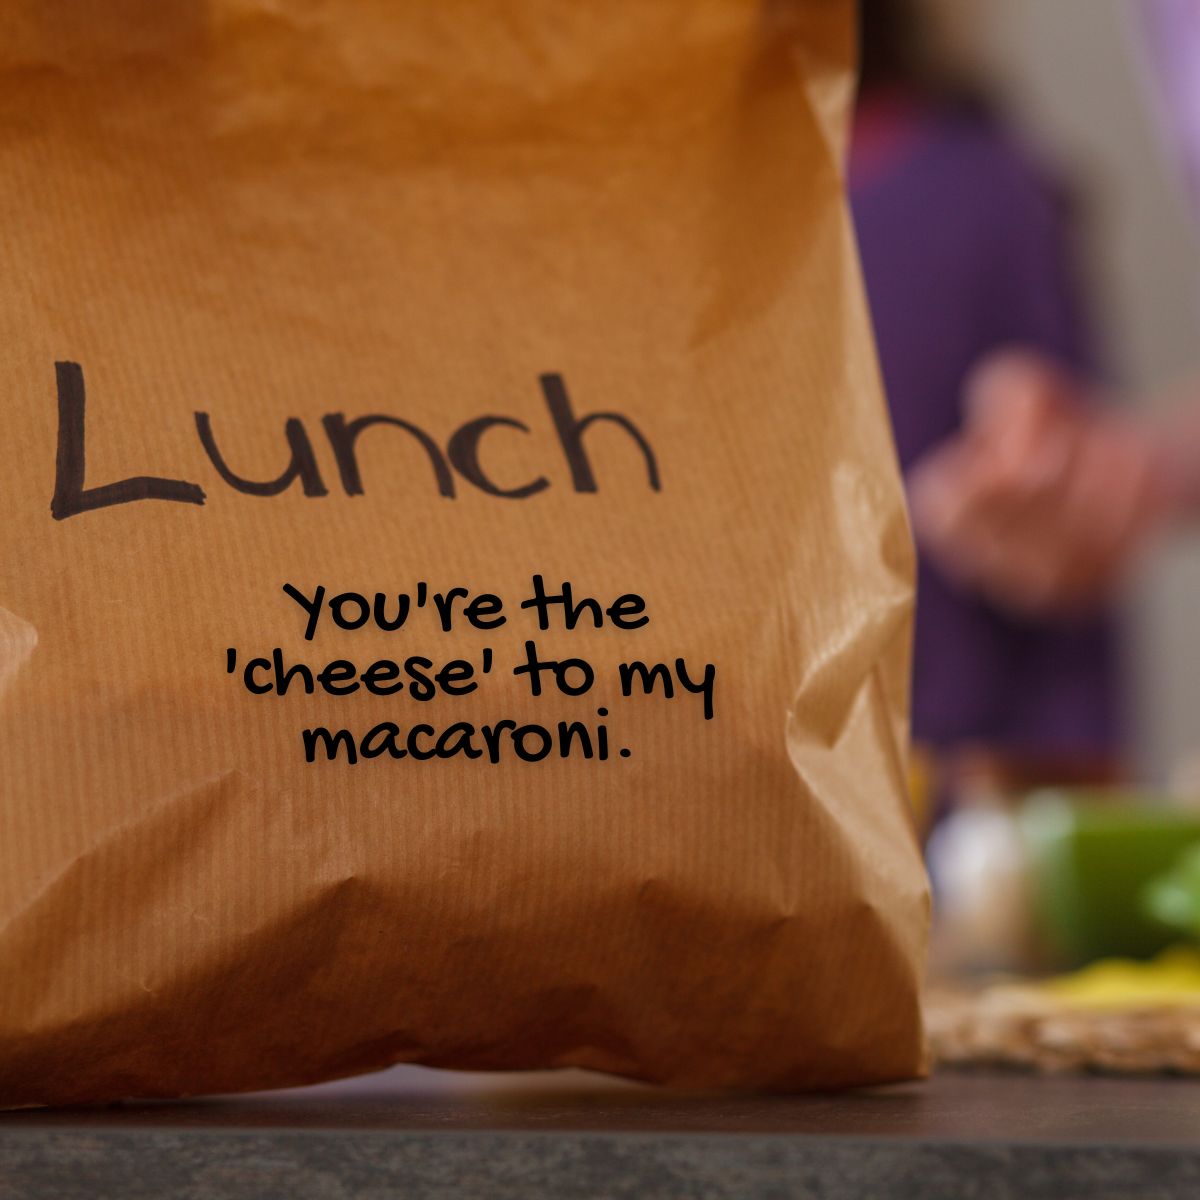 Brown paper lunch bag with a note written on it that says "You're the cheese to my macaroni."